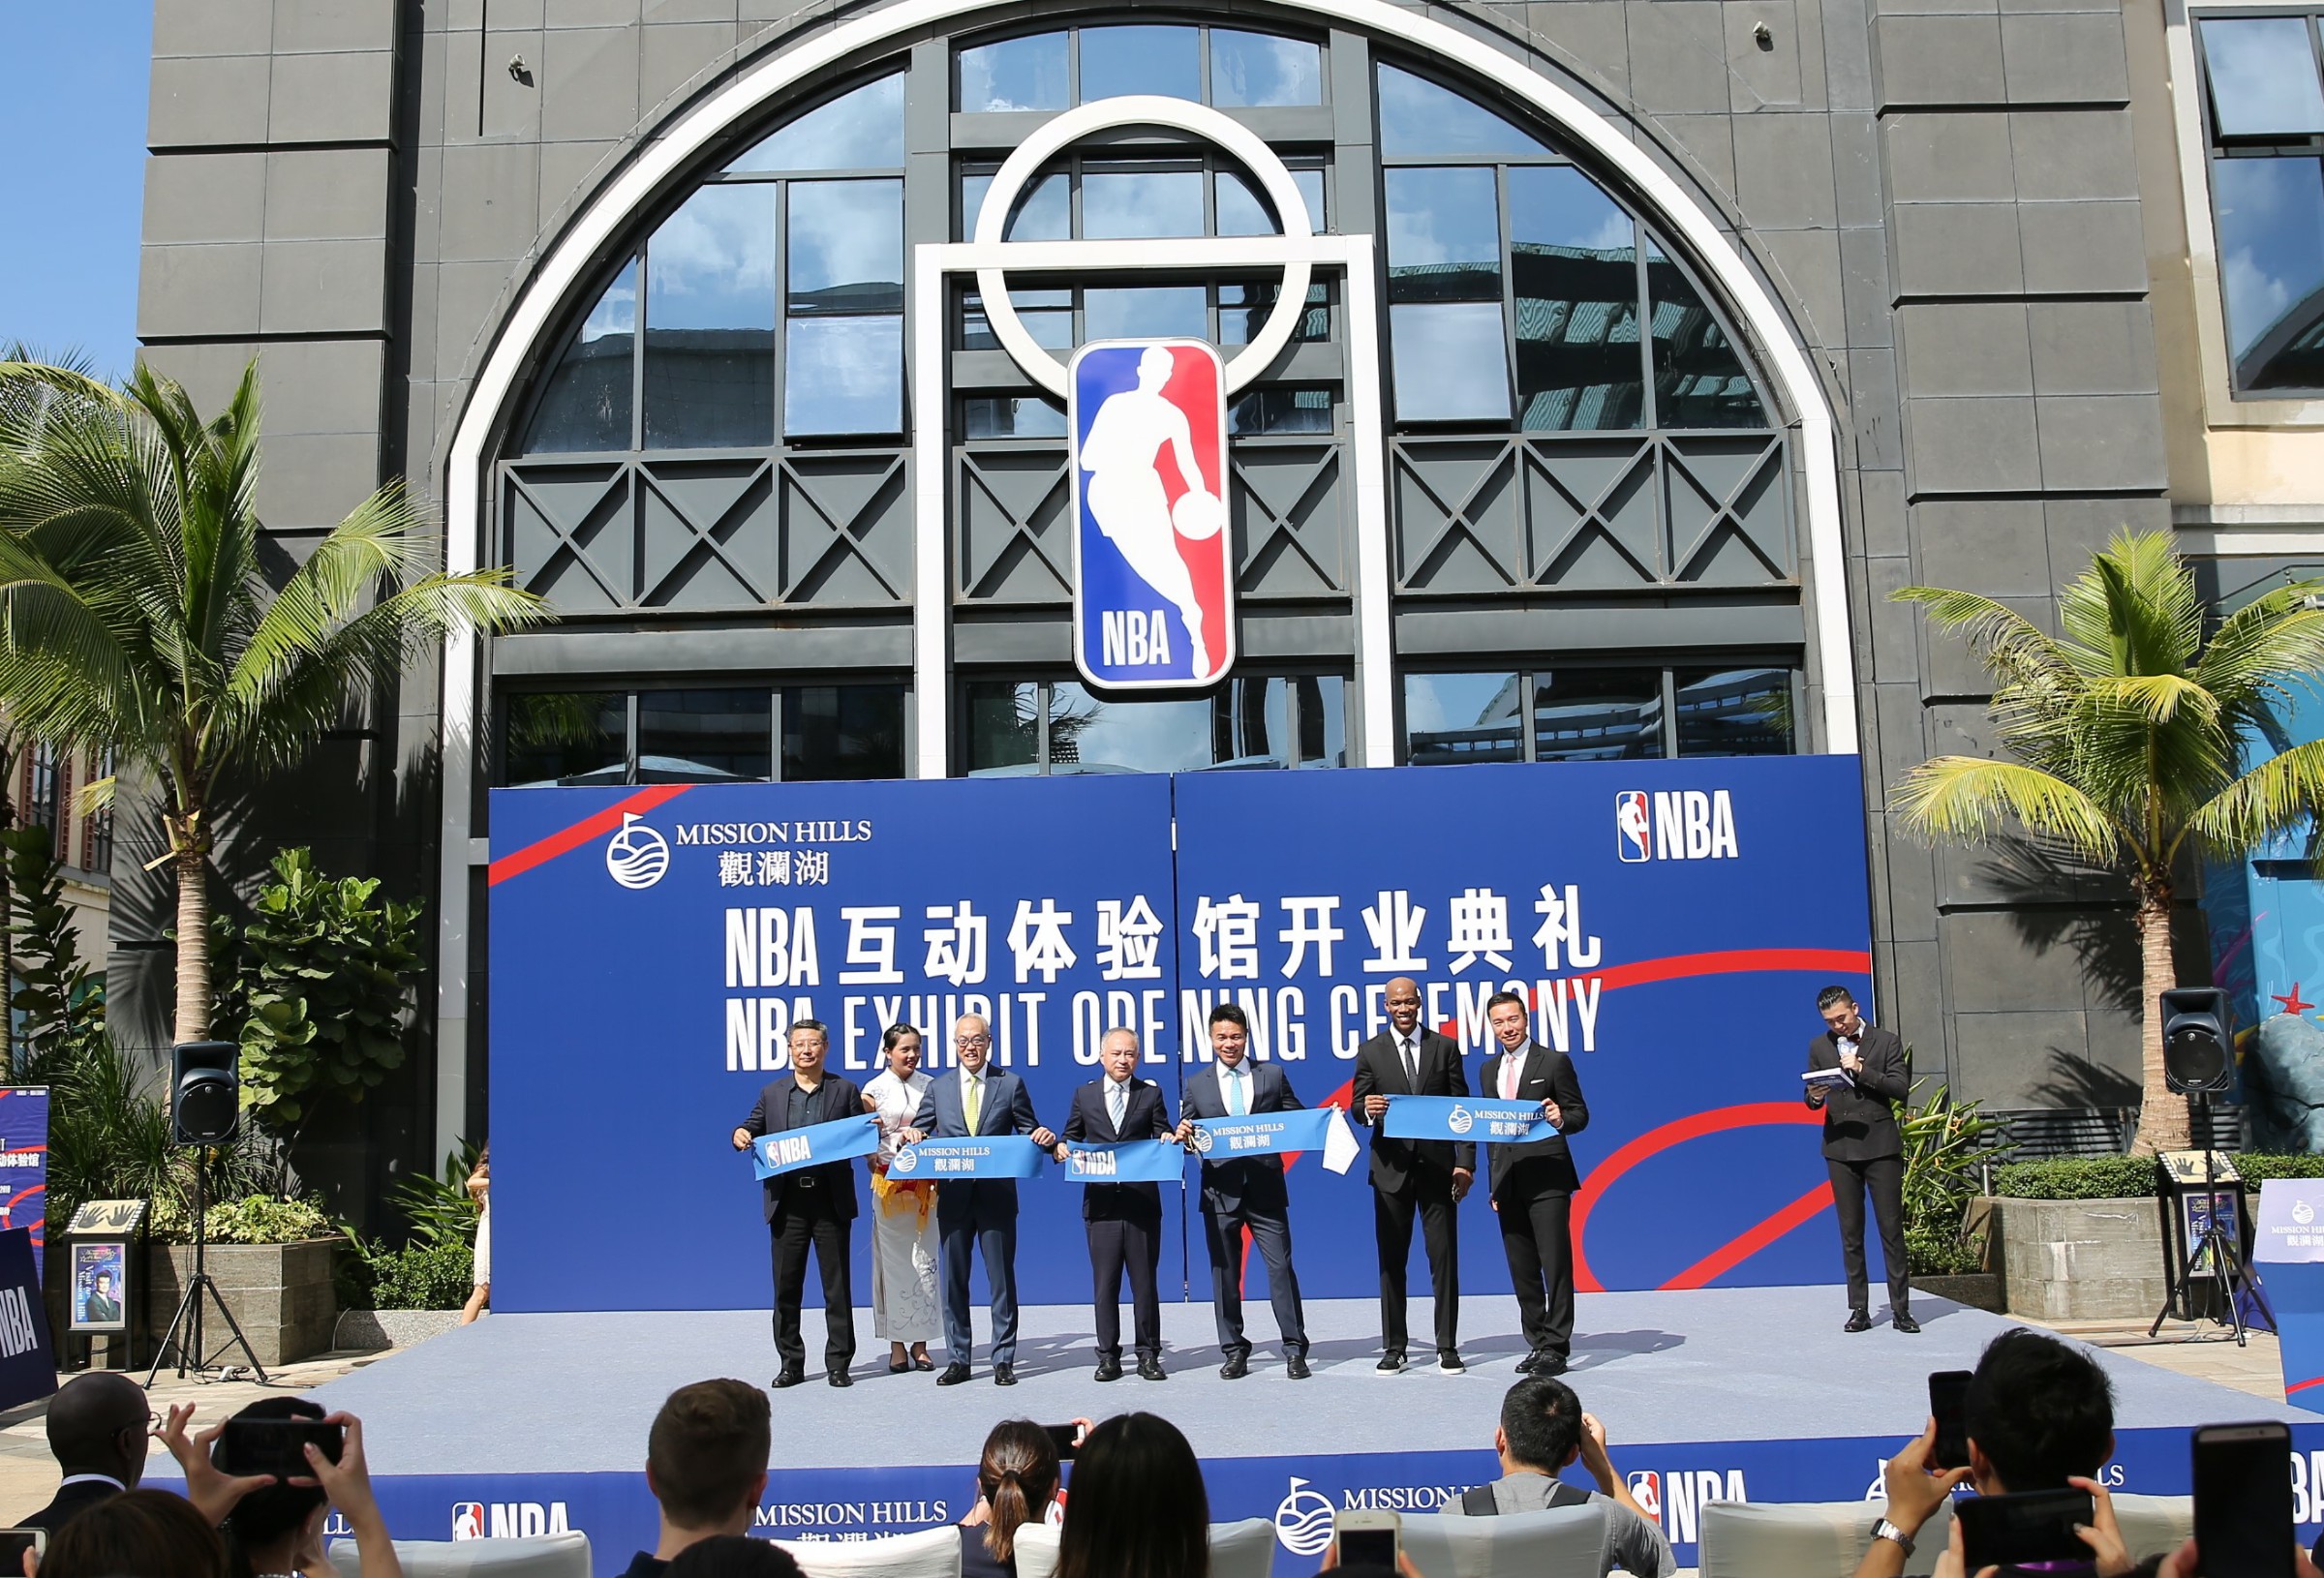 Photo 2 – Official opening of the NBA Exhibit at Mission Hills Haikou in Hainan, China